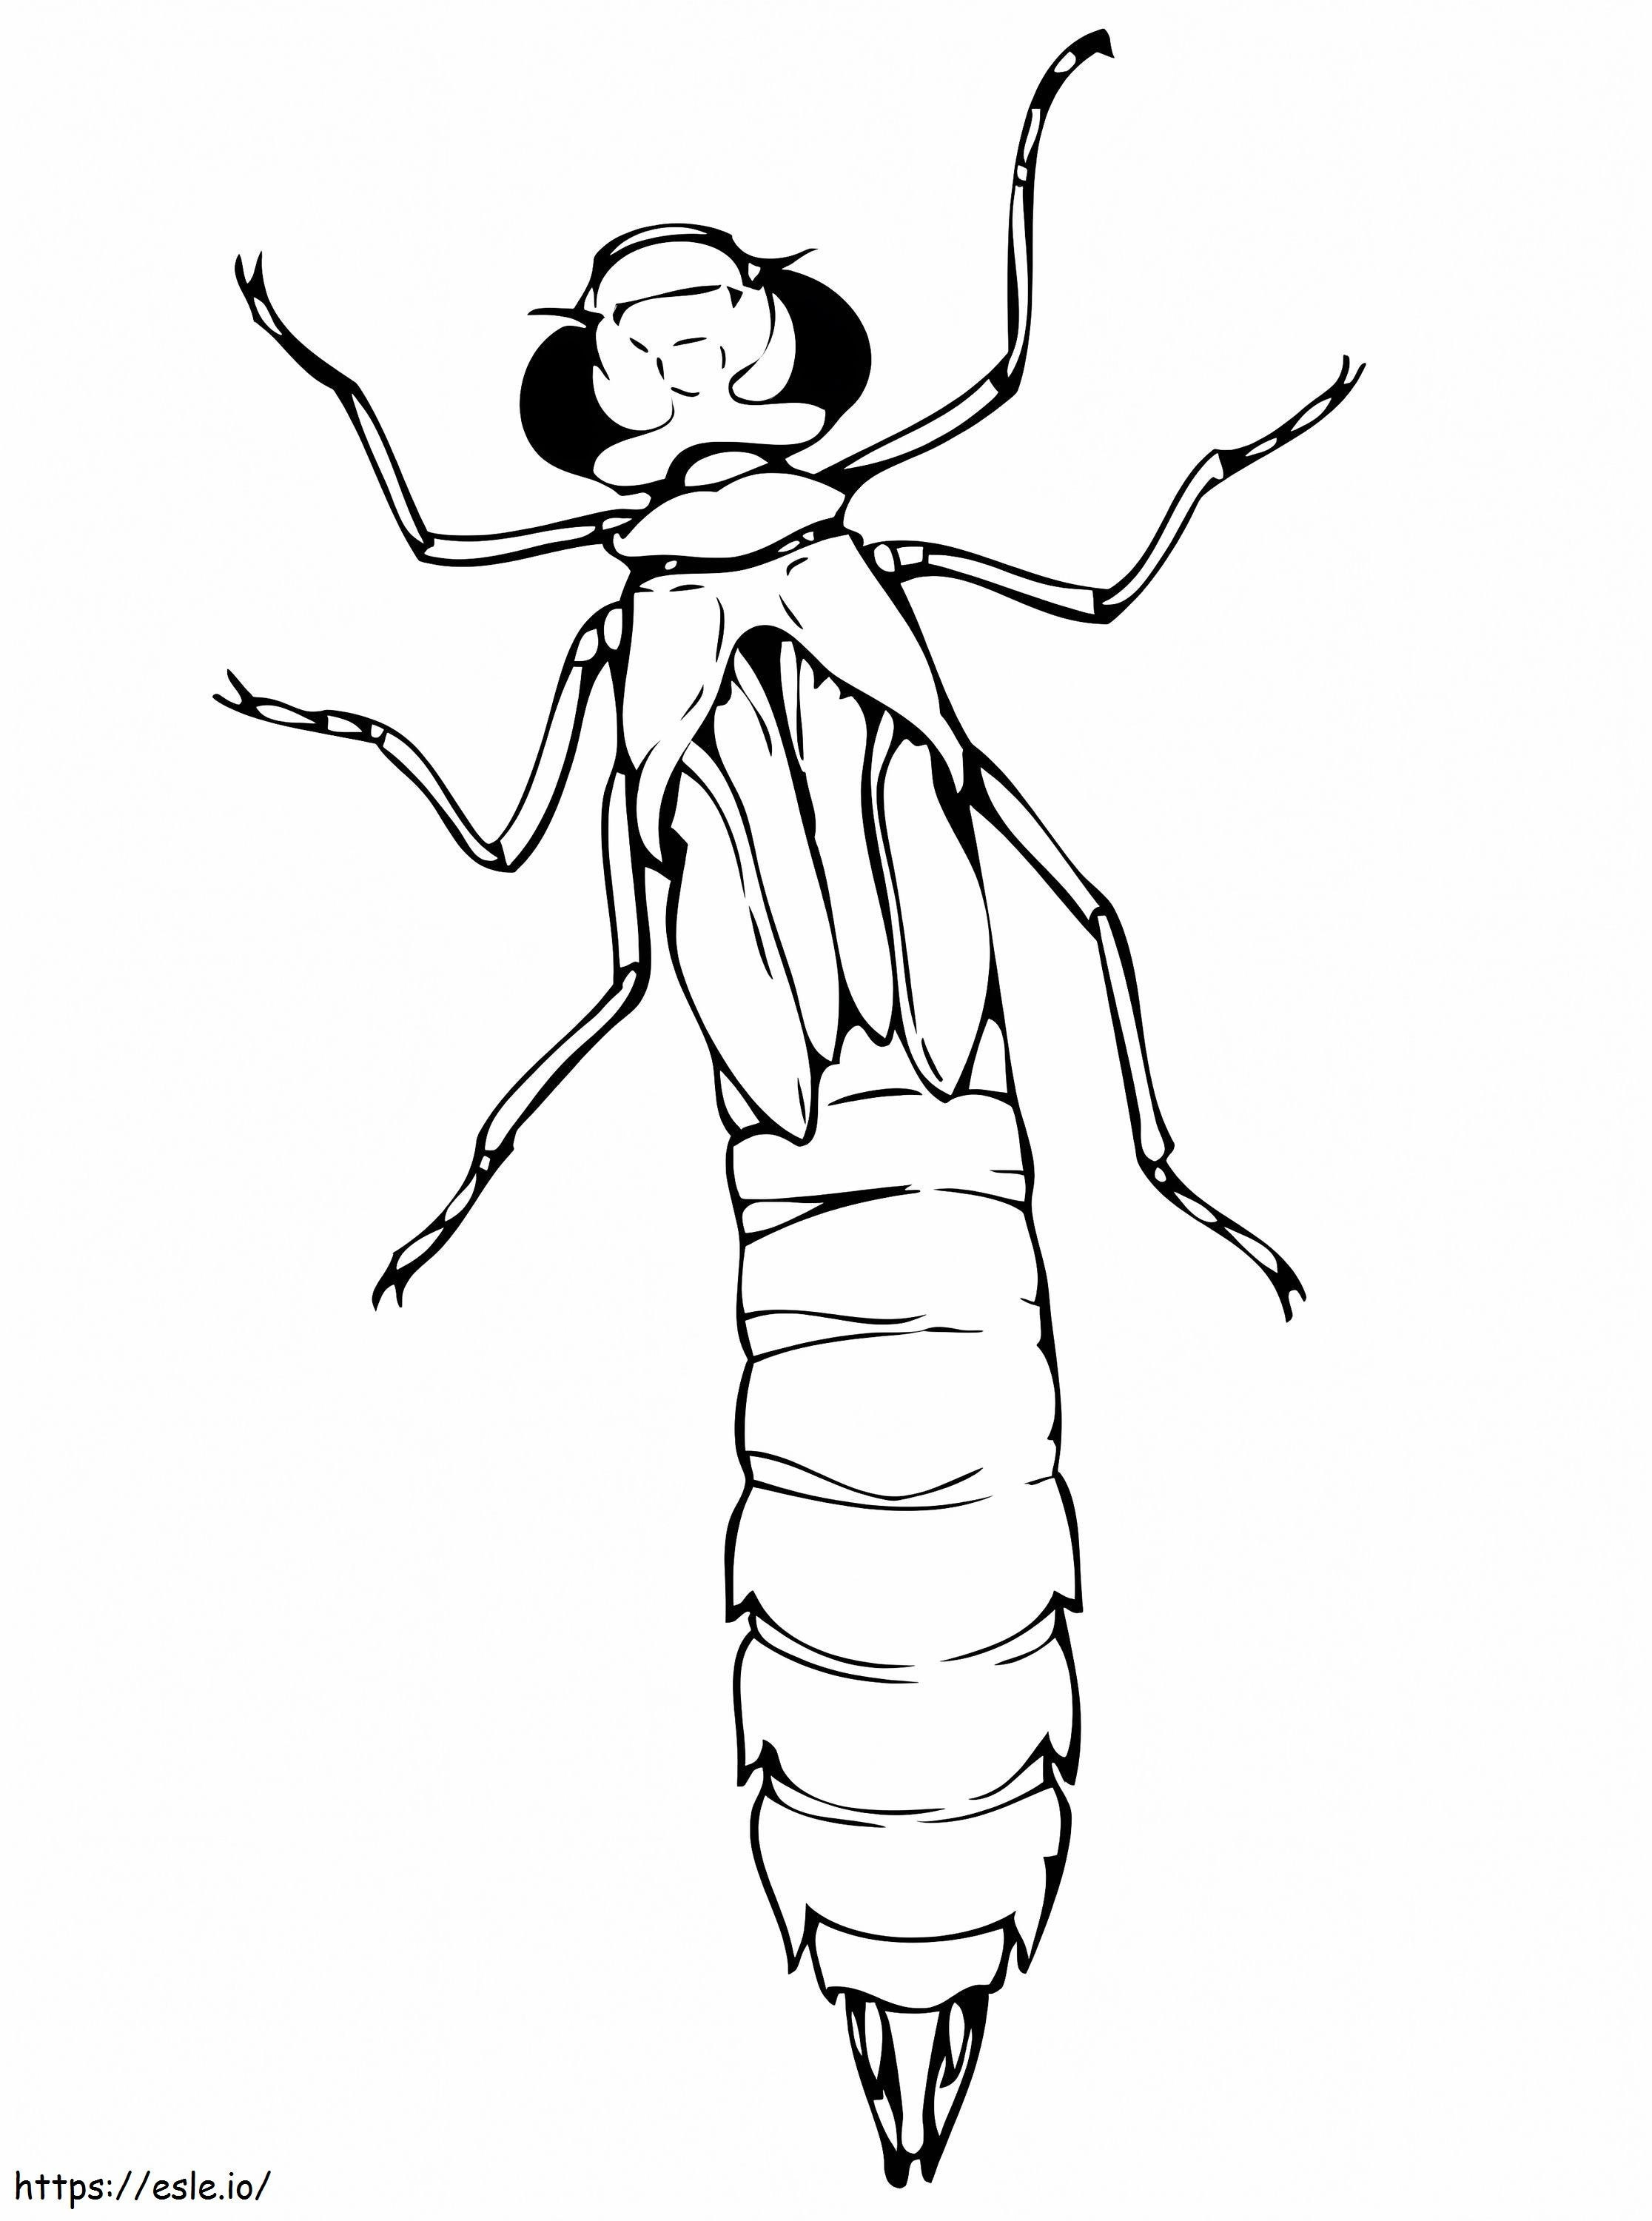 Dragonfly Nymph coloring page